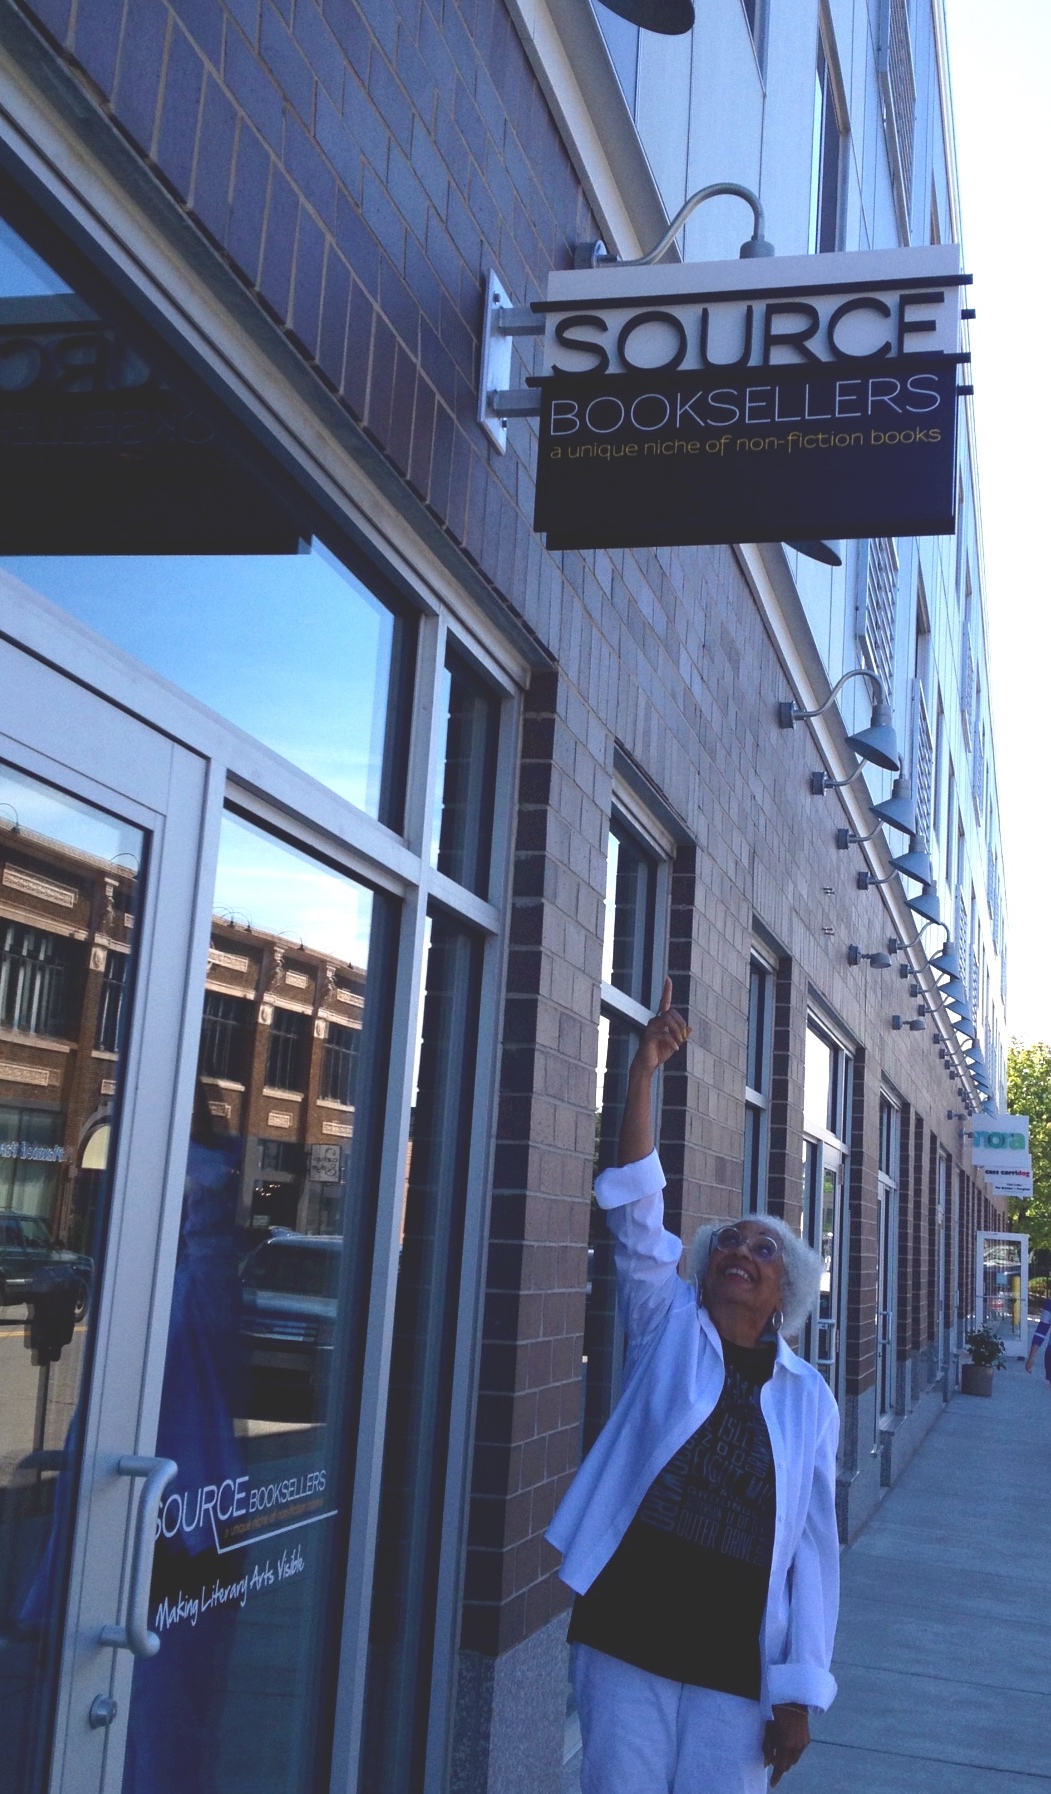 Janet Webster Jones stands outside Source Booksellers, pointing up at the store's sign.